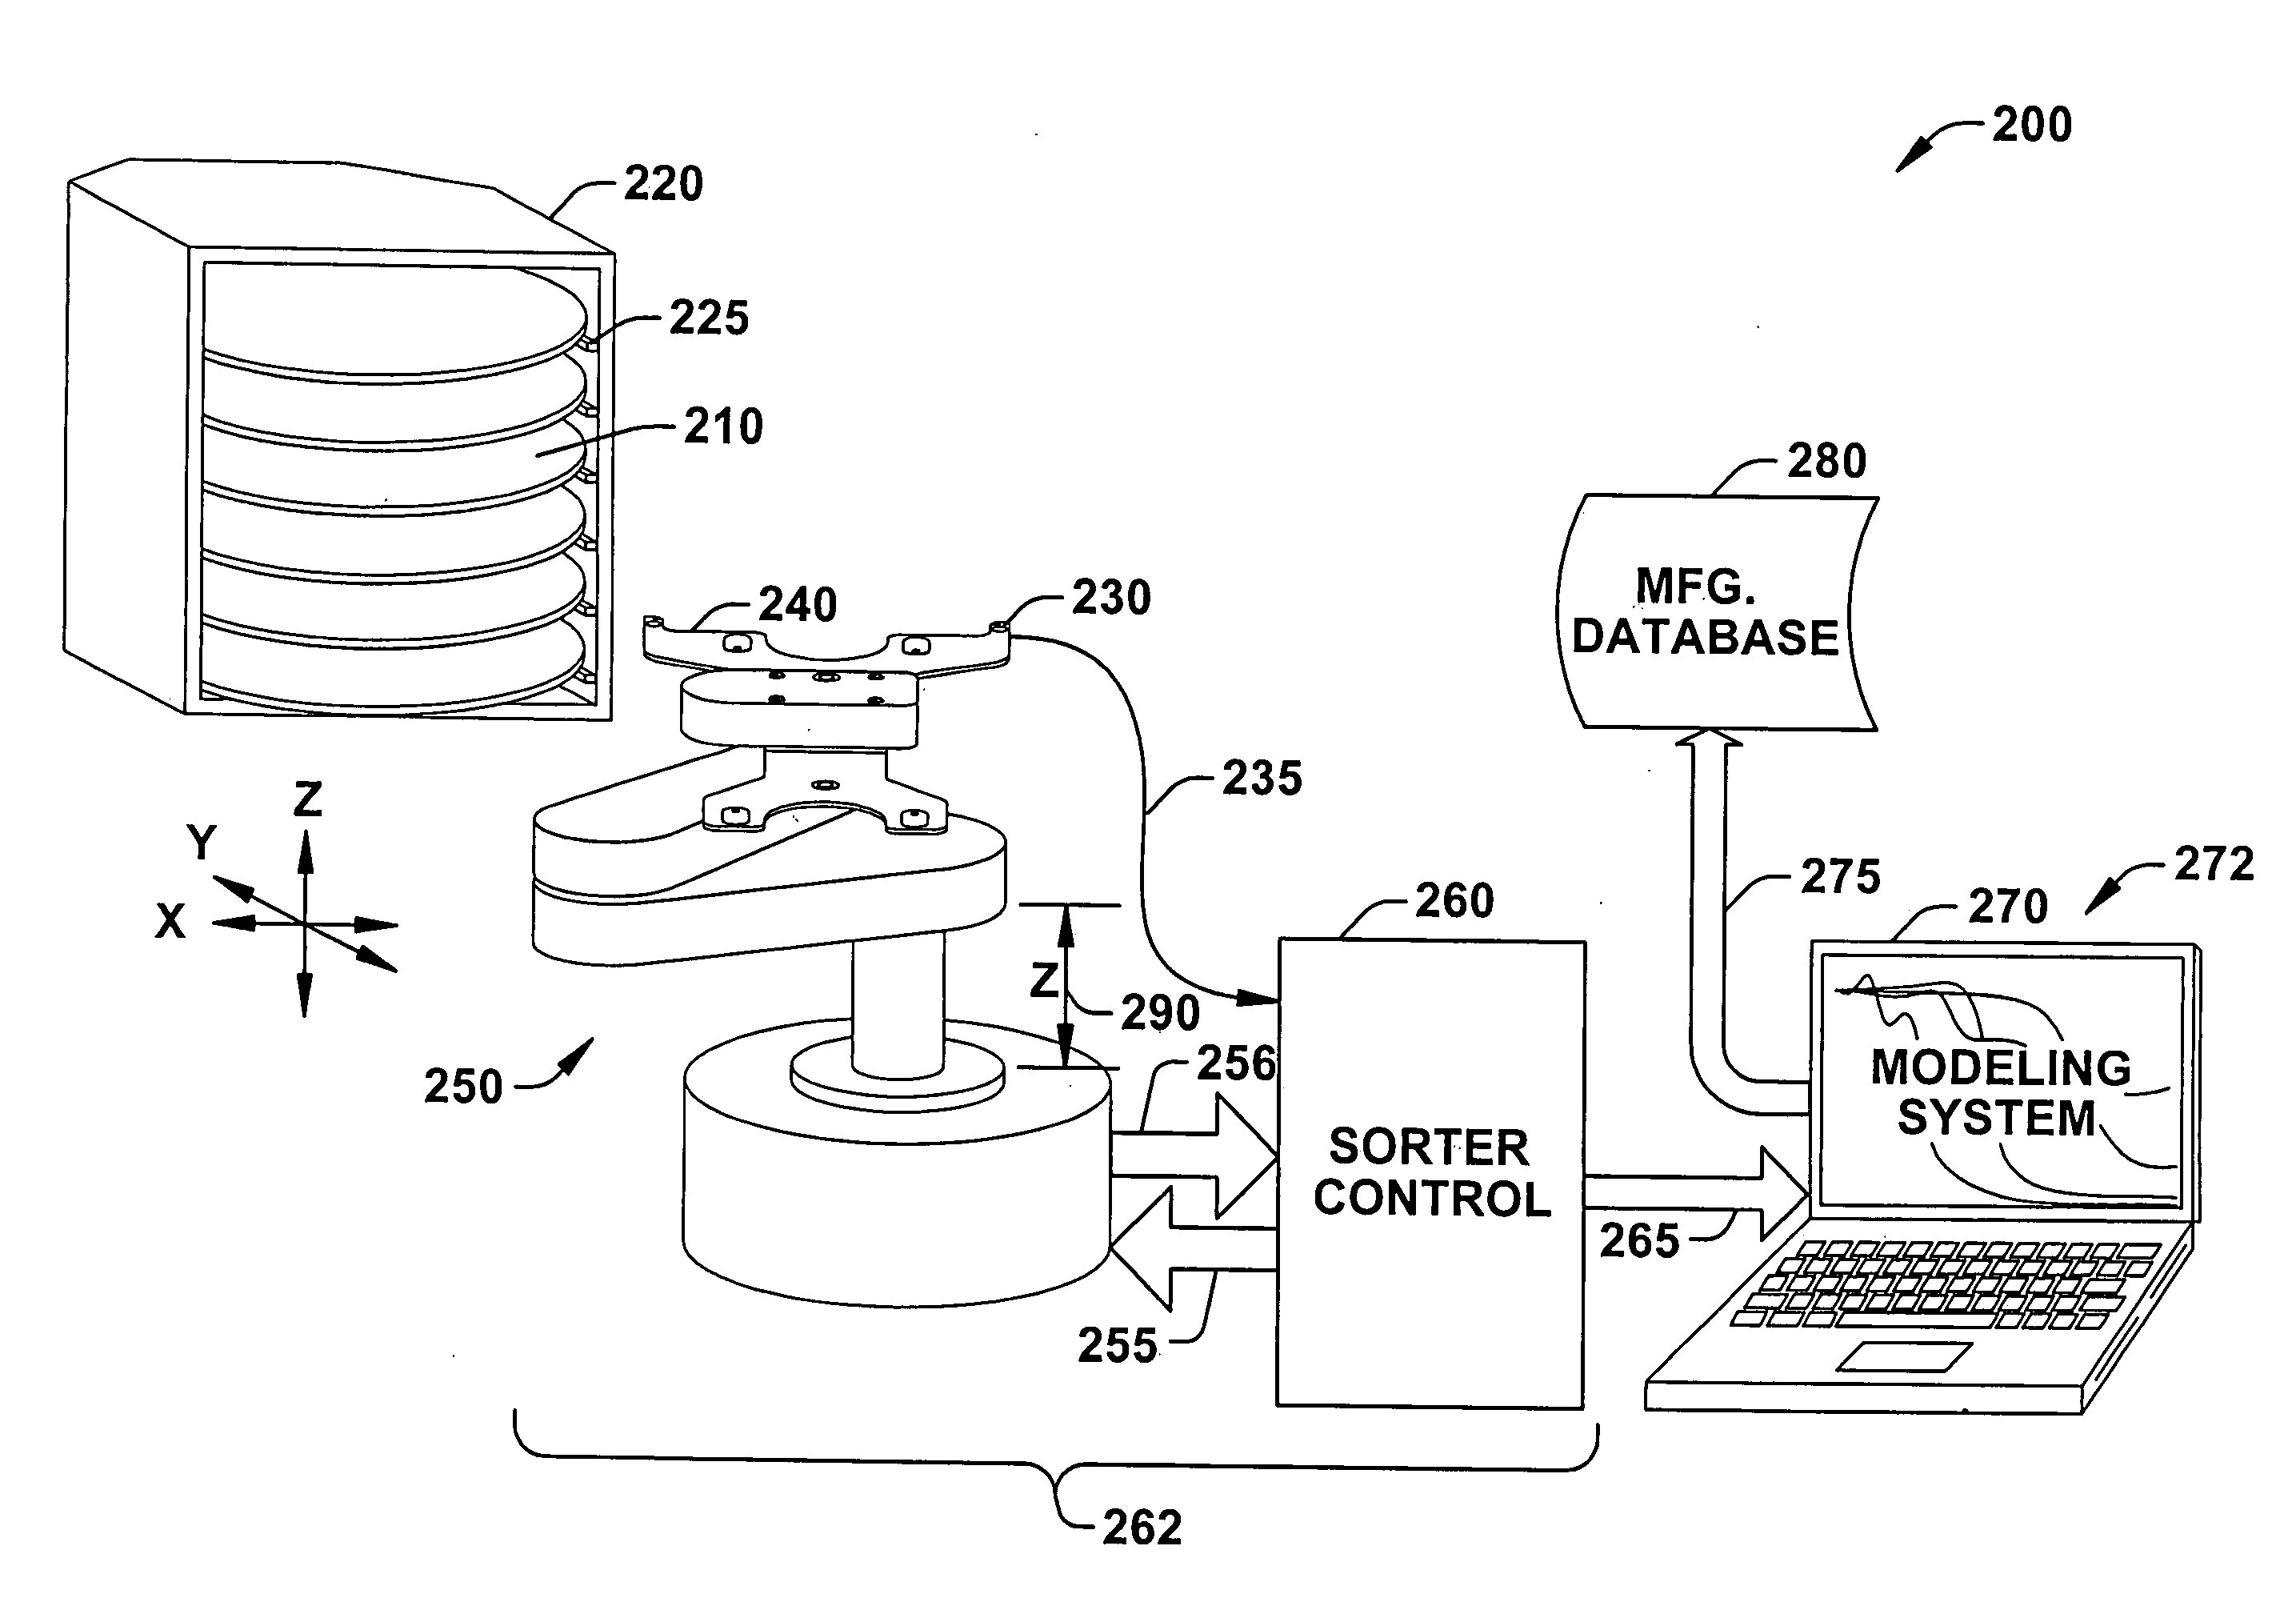 Method and apparatus for cassette integrity testing using a wafer sorter